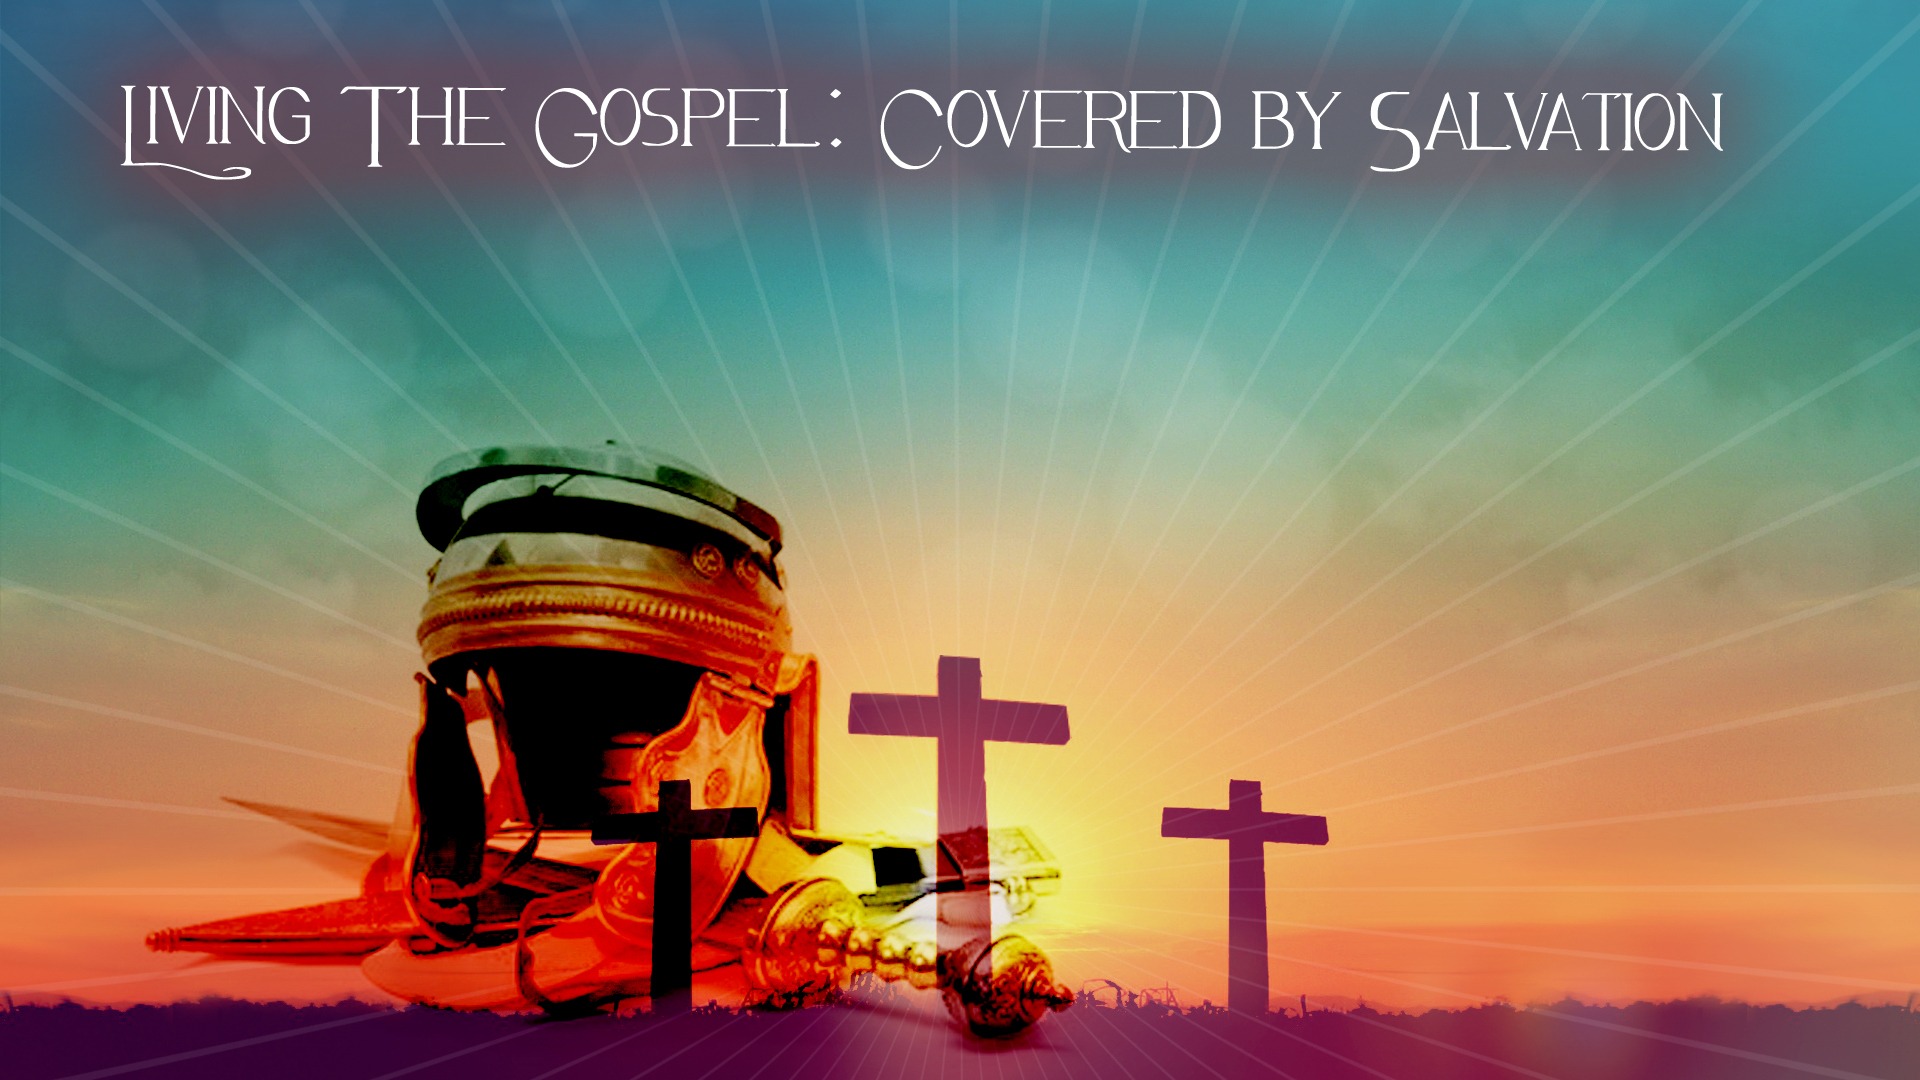 Covered by Salvation